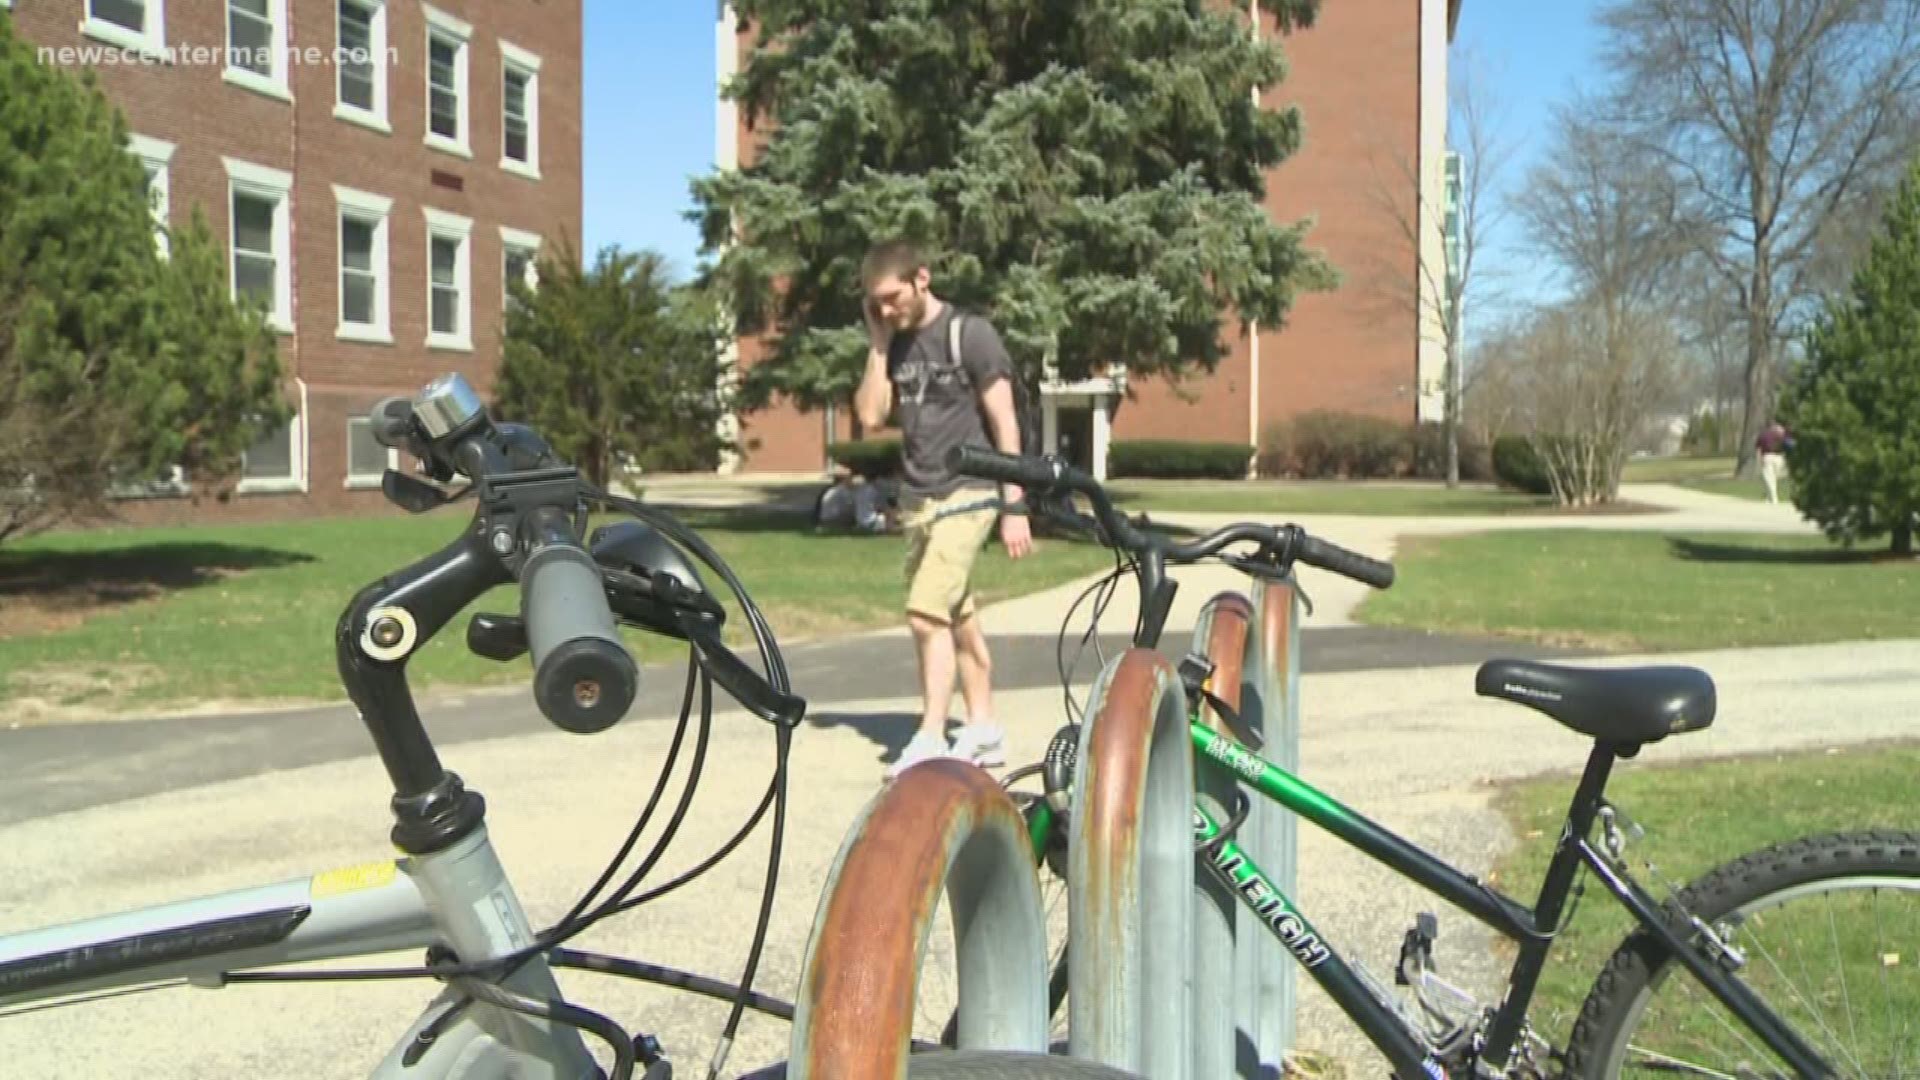 Over 4,000 students are attending University of Maine schools tuition-free this semester.